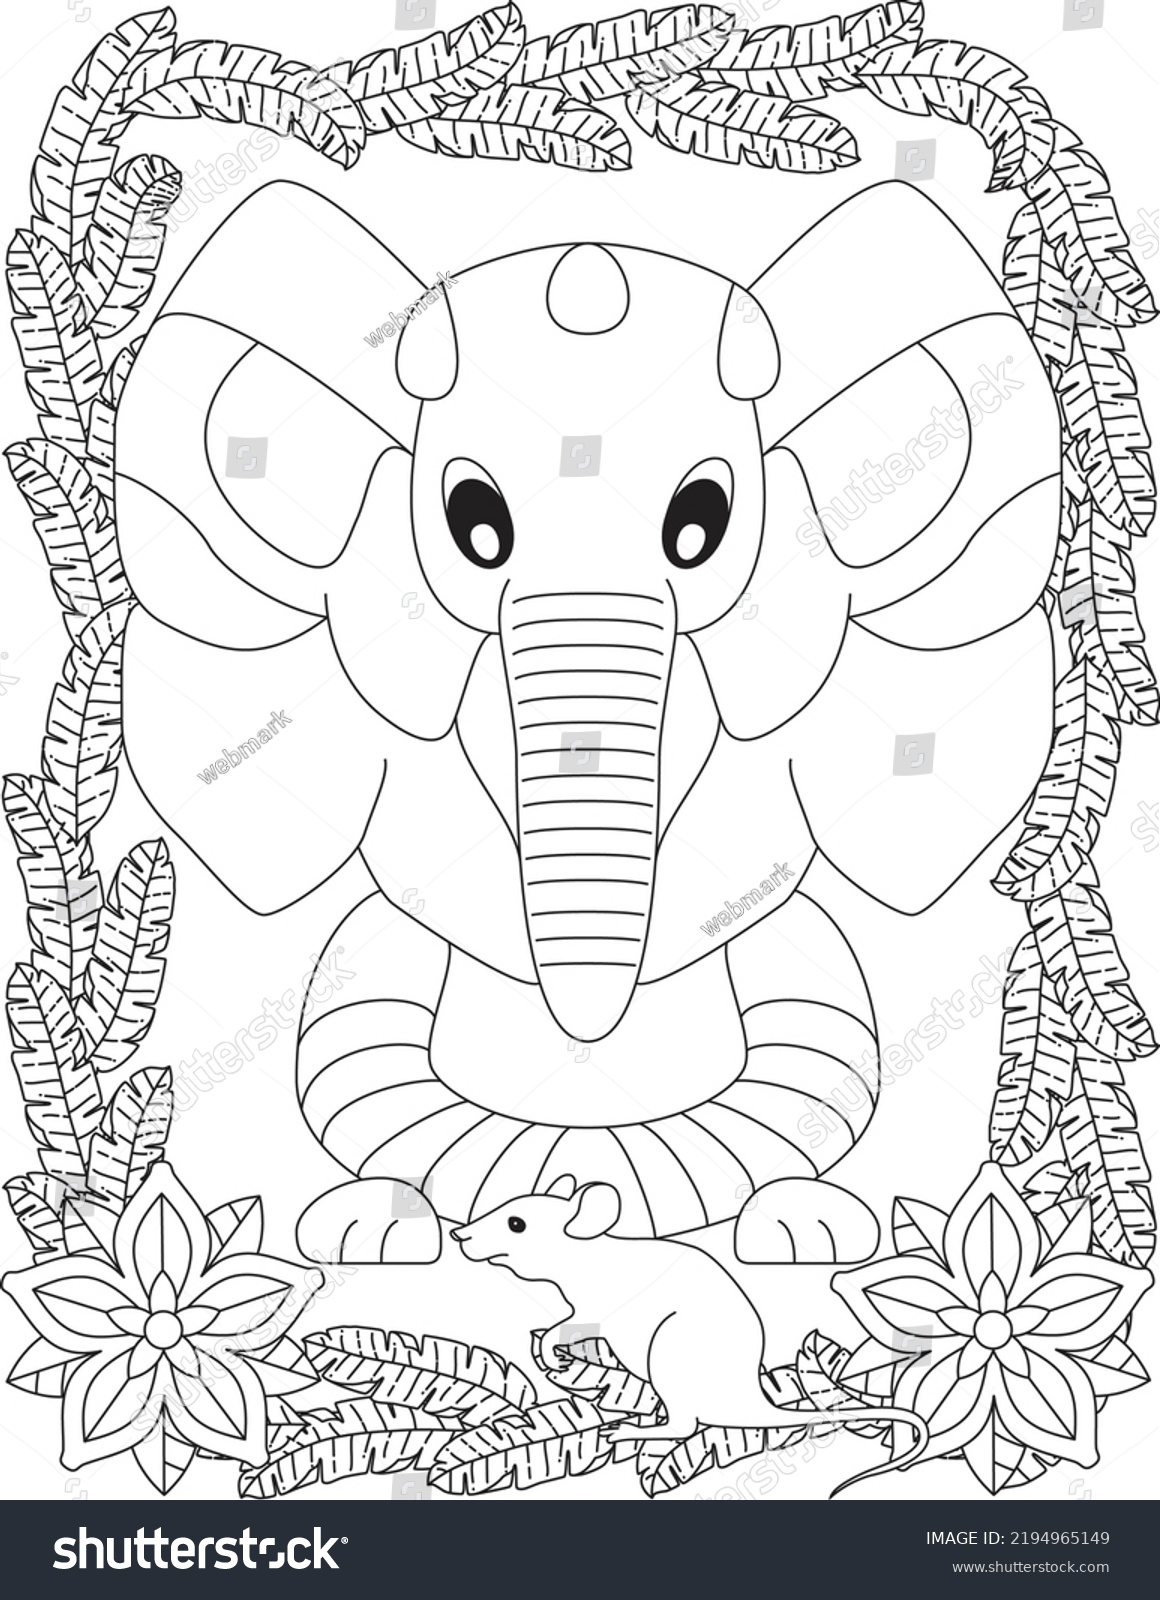 Funny Cartoon Elephant Coloring Page Stock Vector (Royalty Free ...